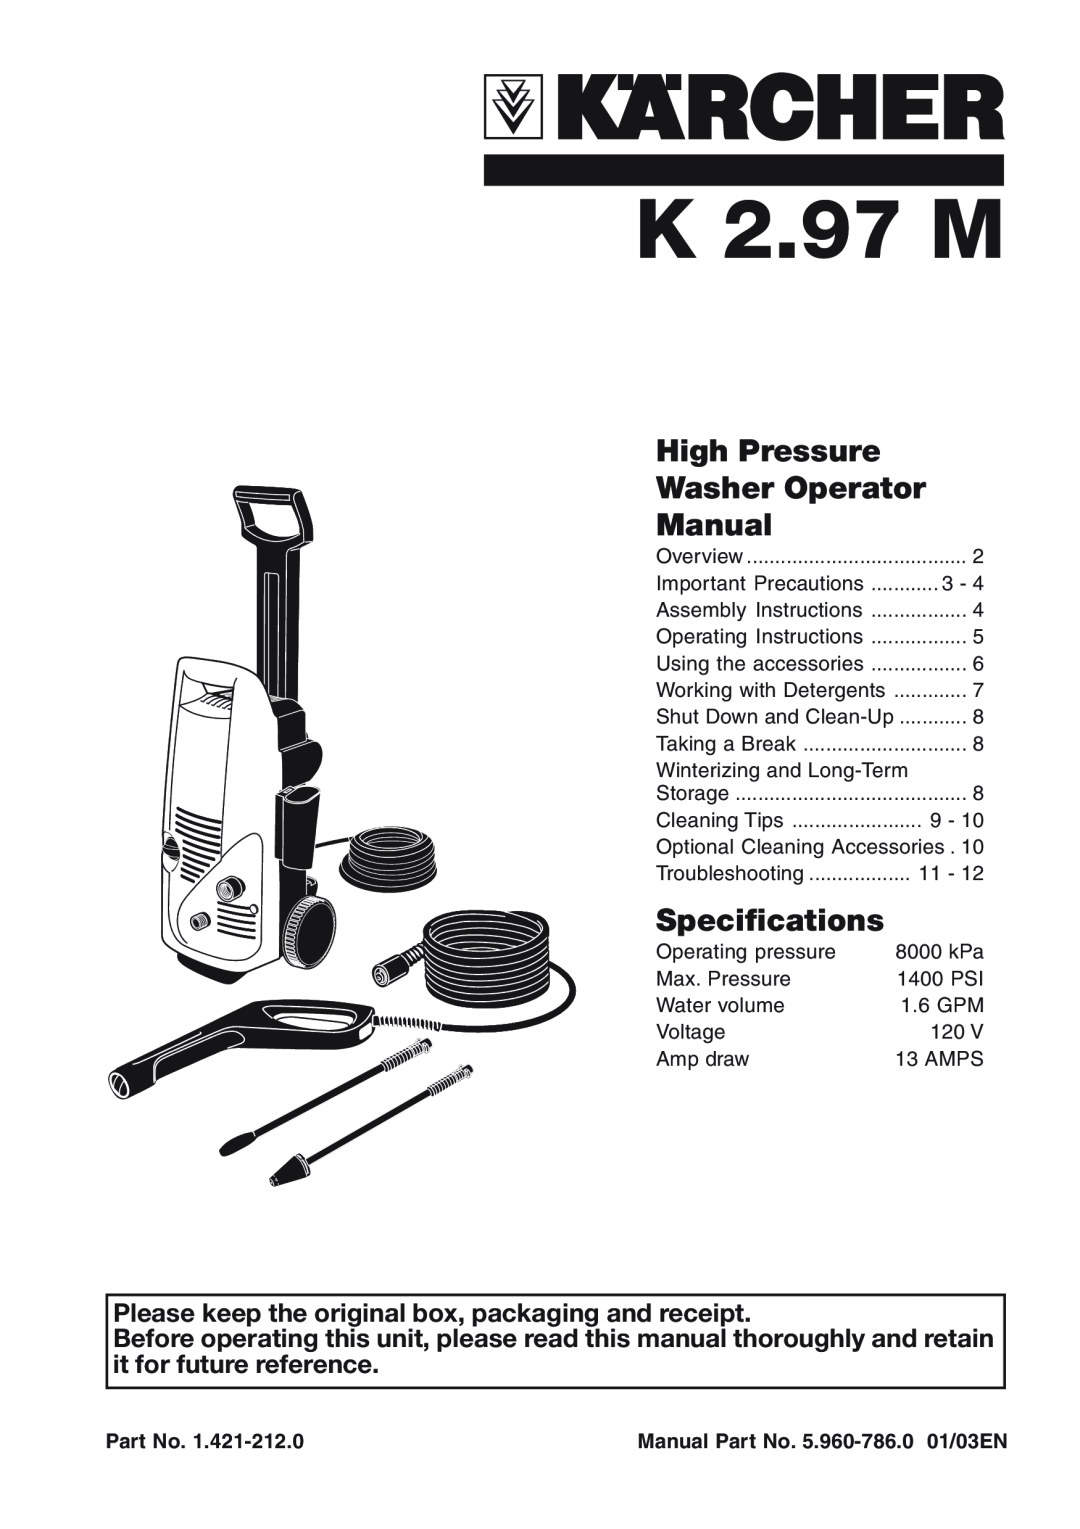 Karcher K 2.97 M specifications Please keep the original box, packaging and receipt, Manual Part No. 5.960-786.0 01/03EN 